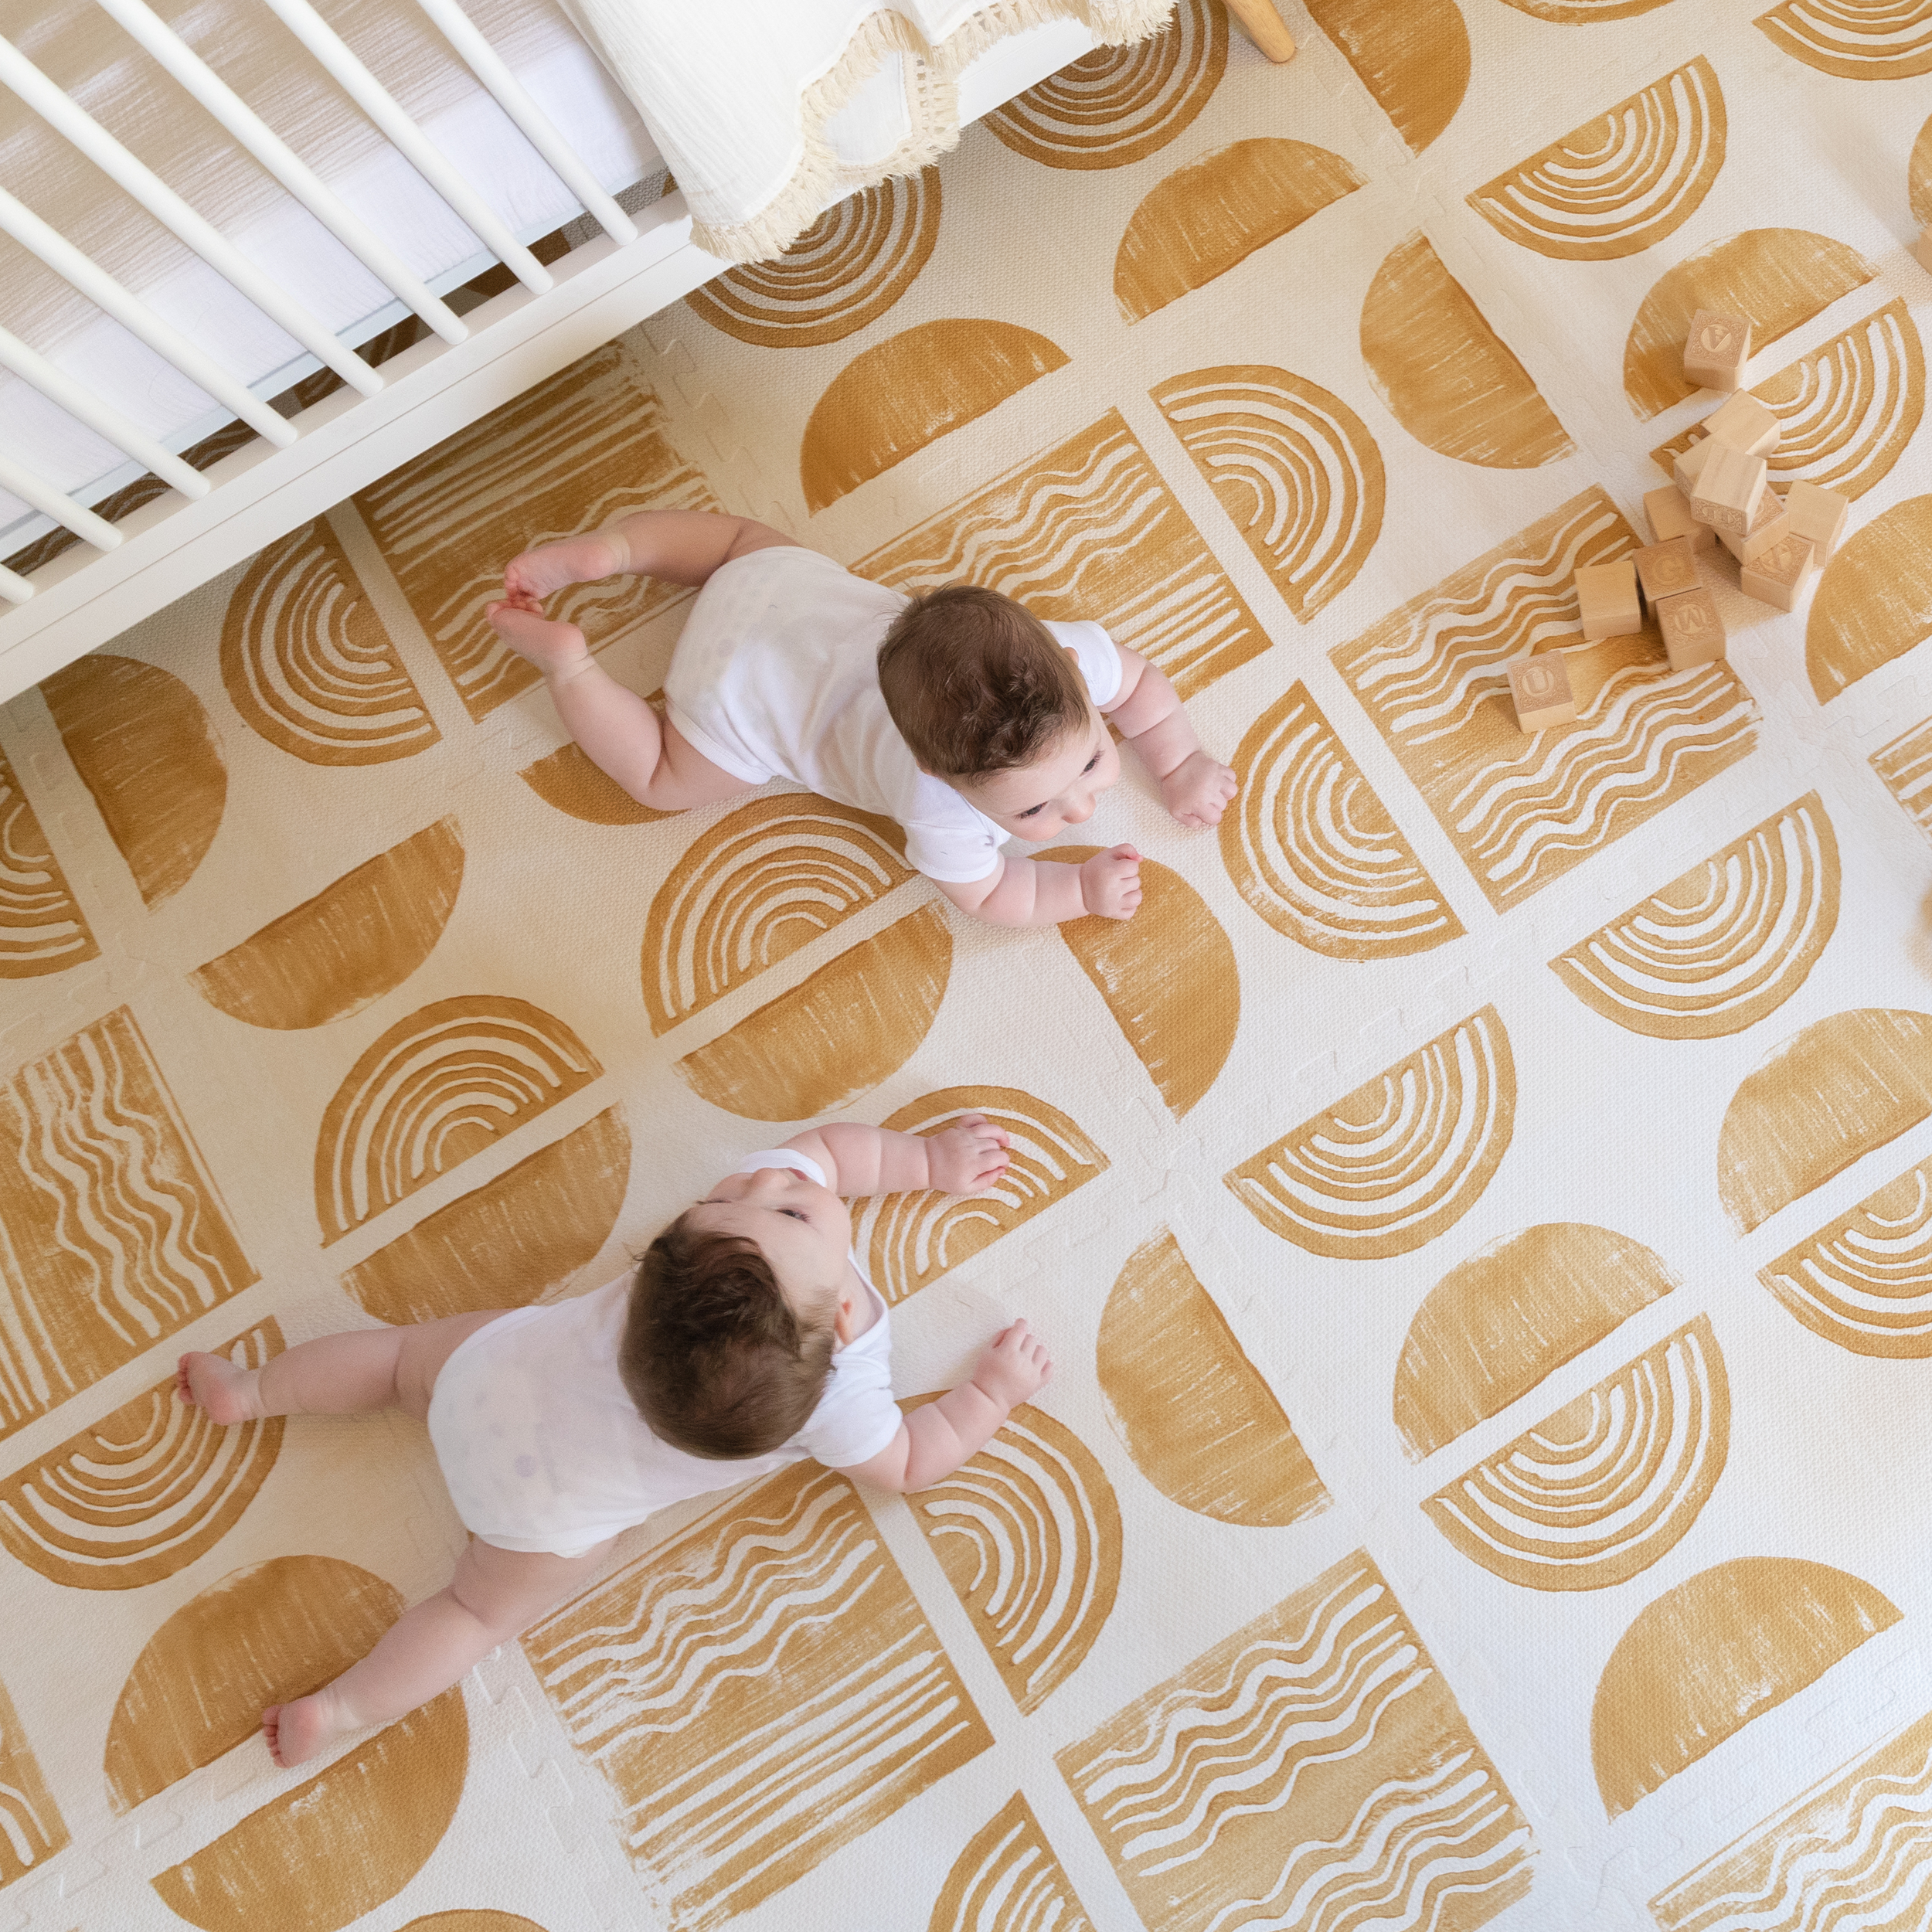 Ada modern minimalist baby play mat in Sunflower, mustard yellow and off white. Photo shot from above in a nursery with twin babies playing on the mat.